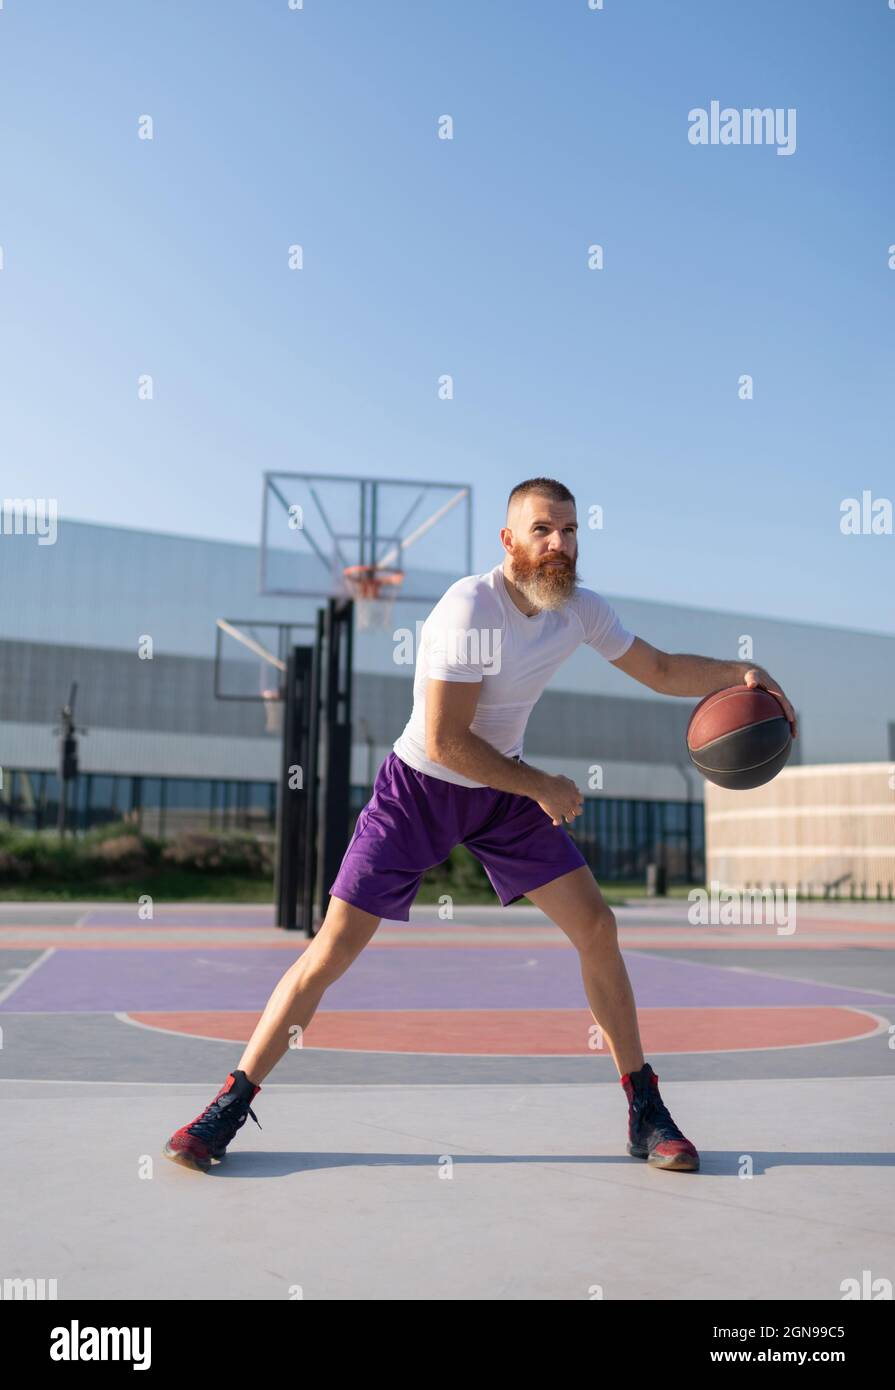 Bearded sportsman practicing to dribble ball during streetball training on court Stock Photo